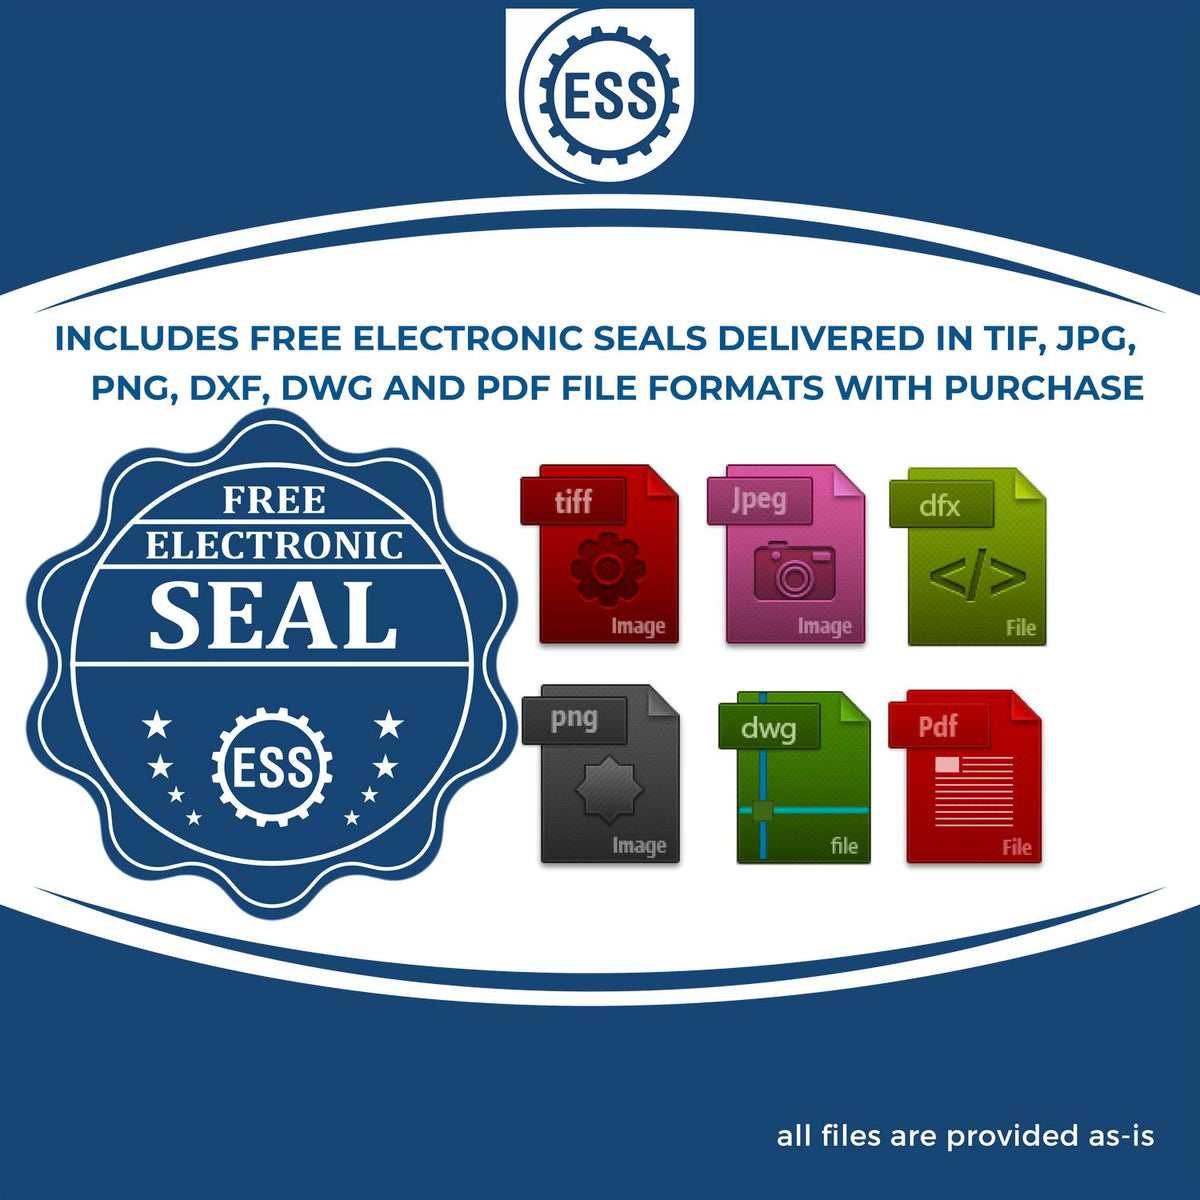 An infographic for the free electronic seal for the Gift Ohio Engineer Seal illustrating the different file type icons such as DXF, DWG, TIF, JPG and PNG.